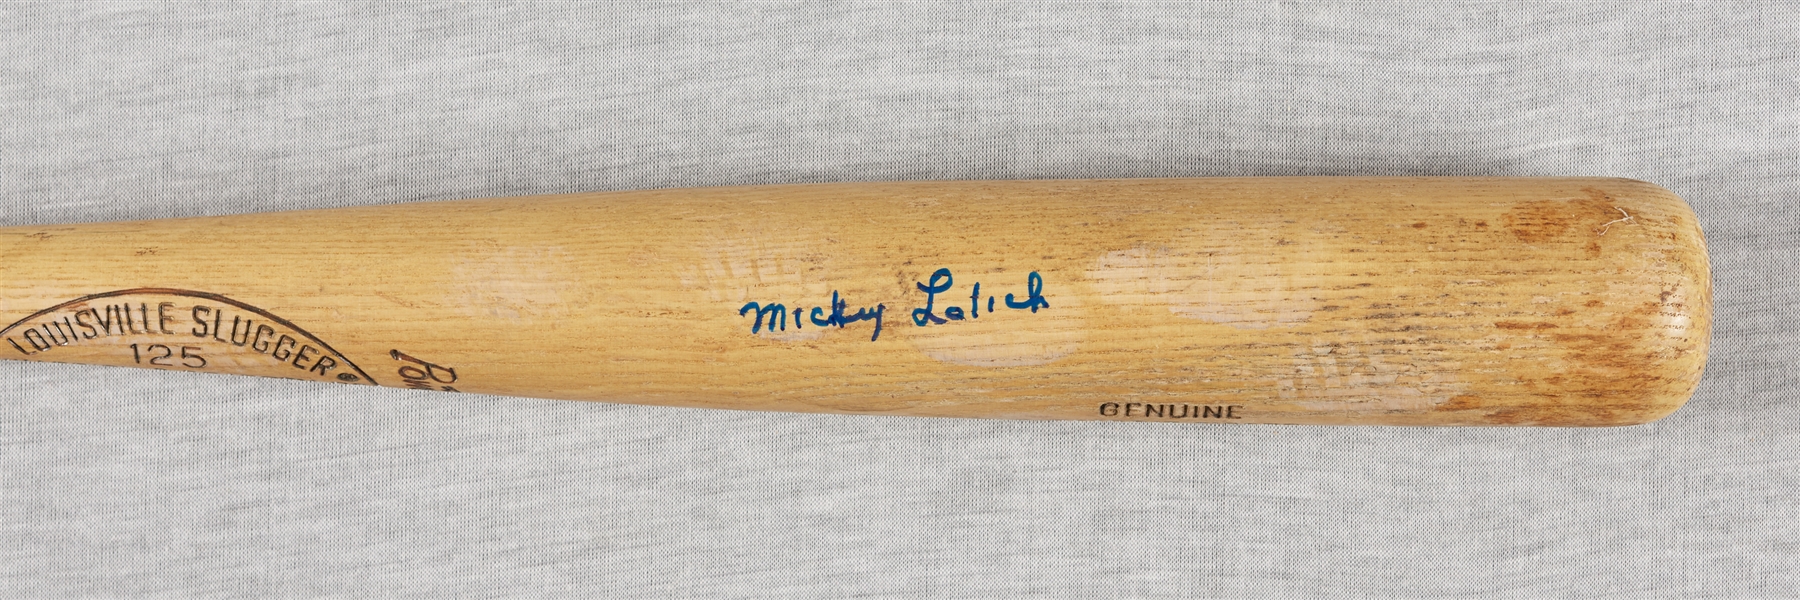 Mickey Lolich Fantasy Camp Jersey with Signed Bat (2)